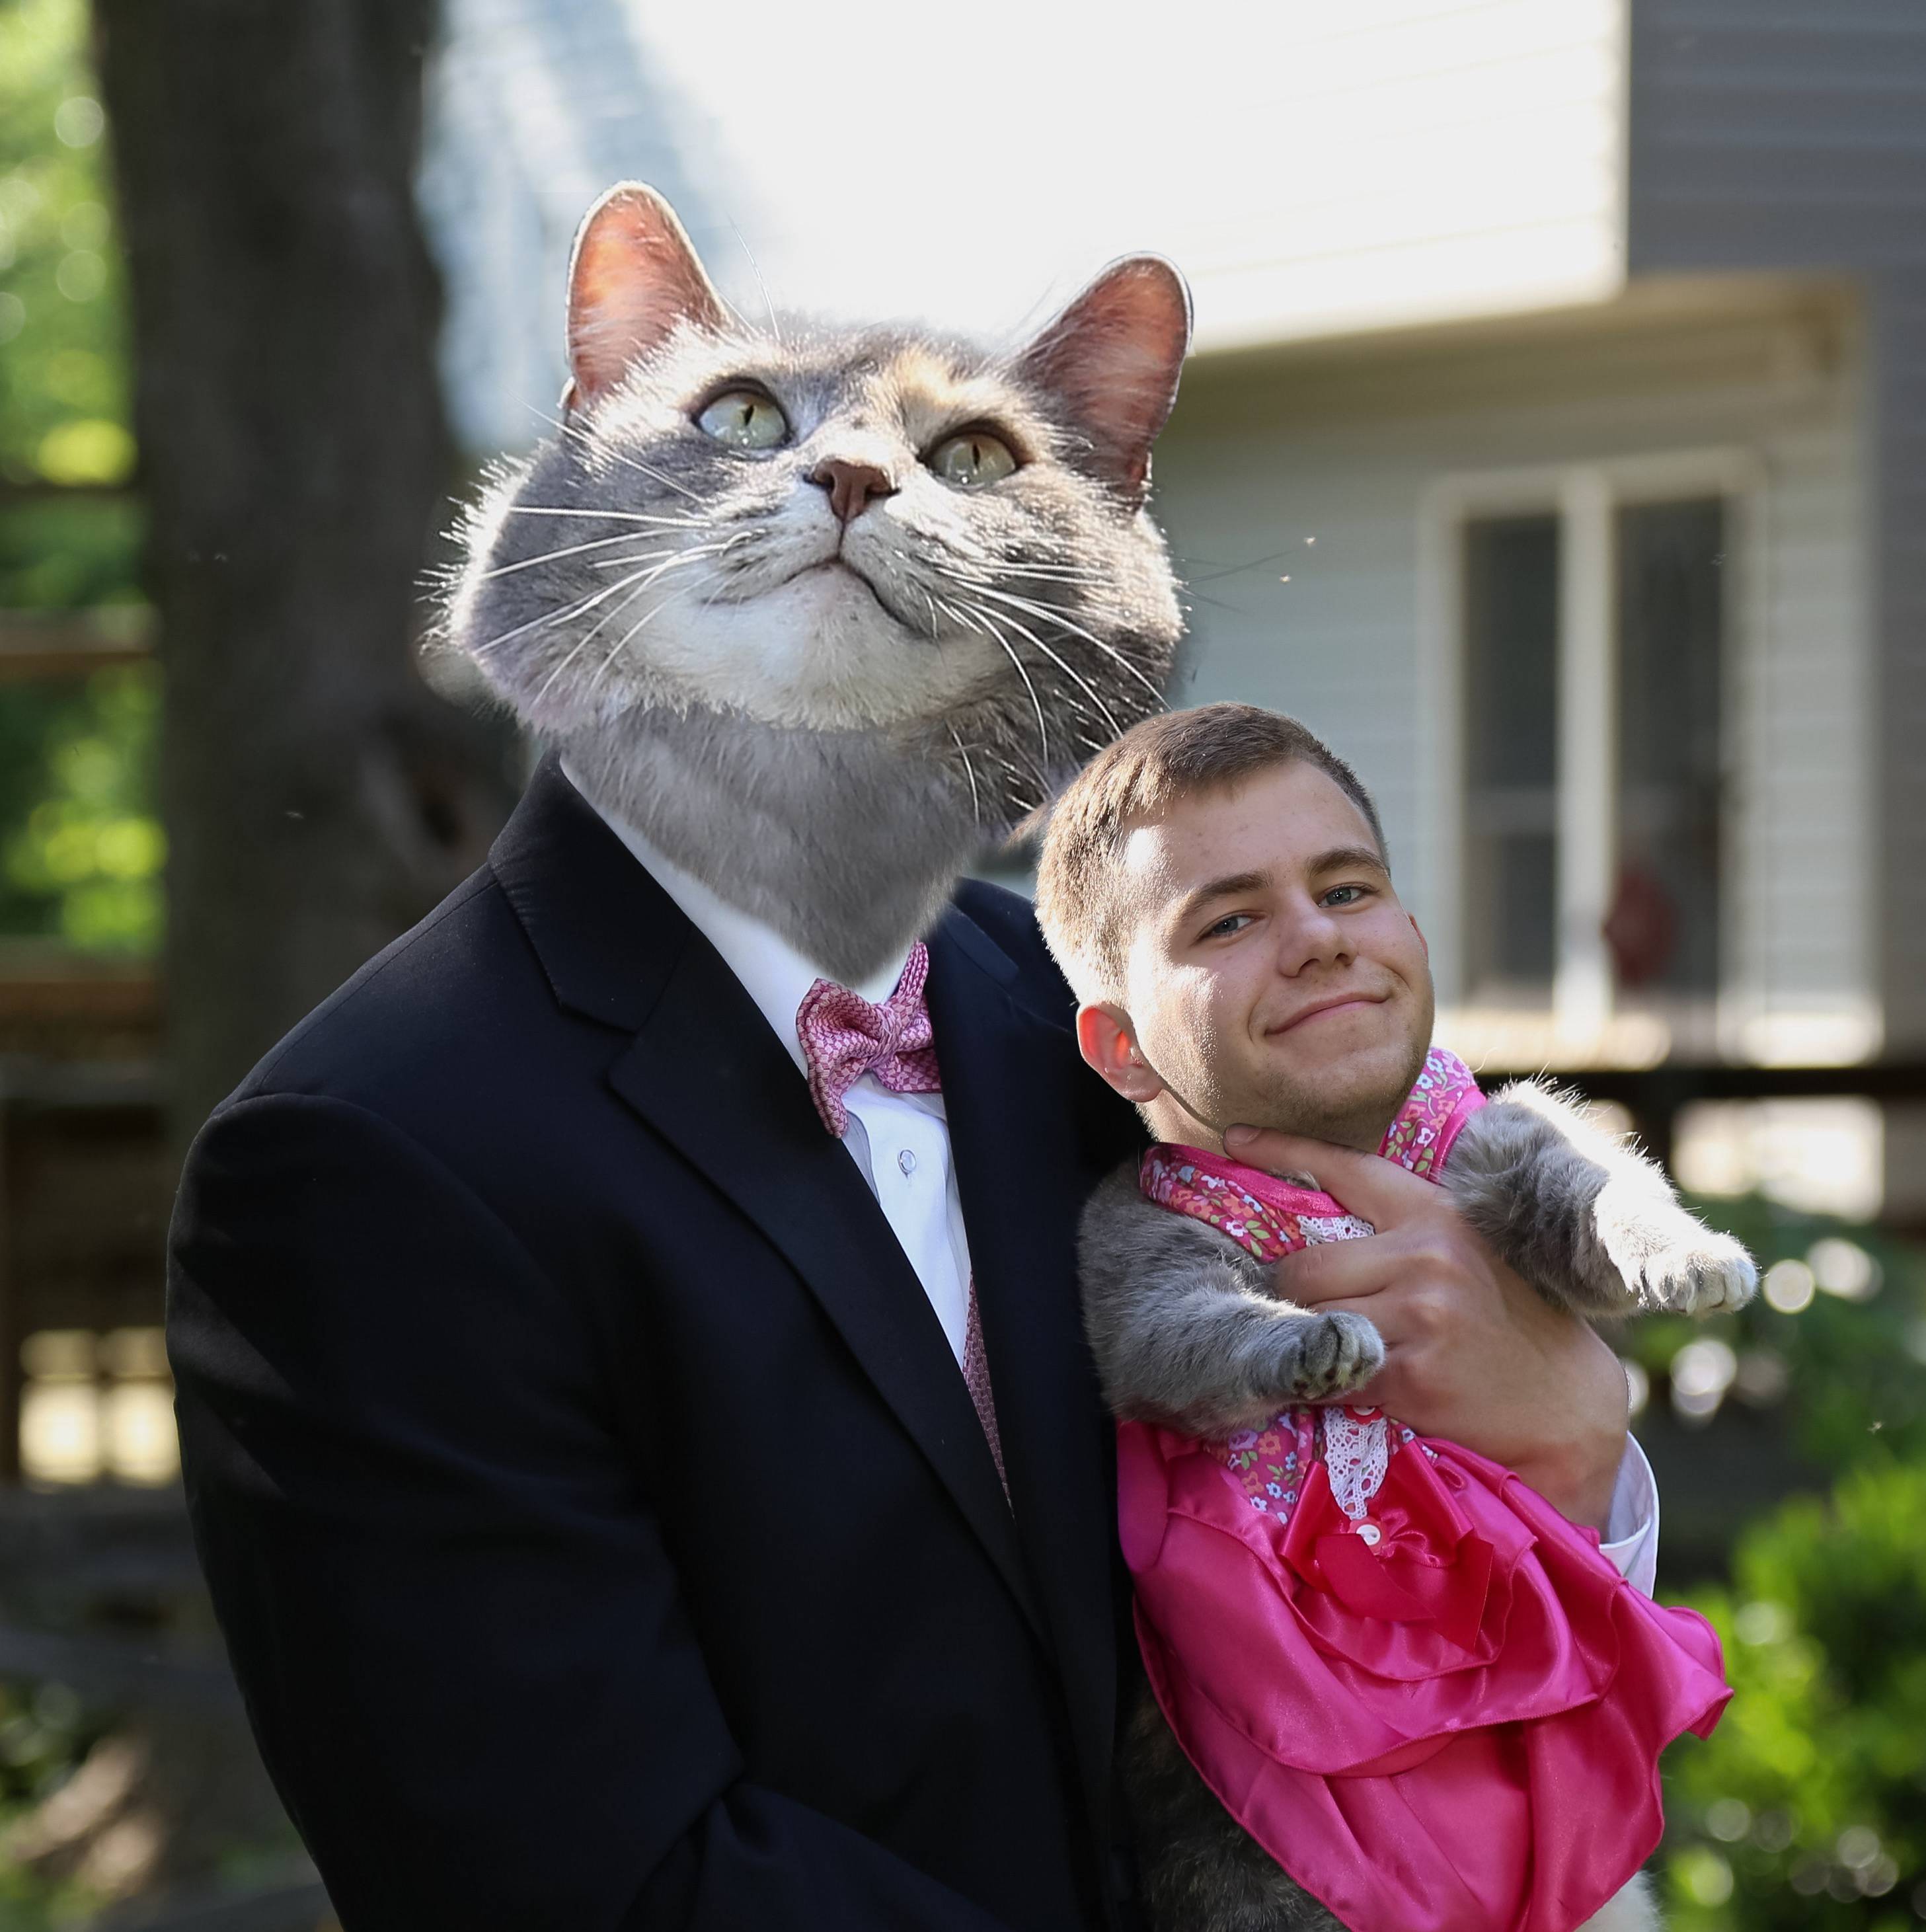 Guy takes his cat to prom